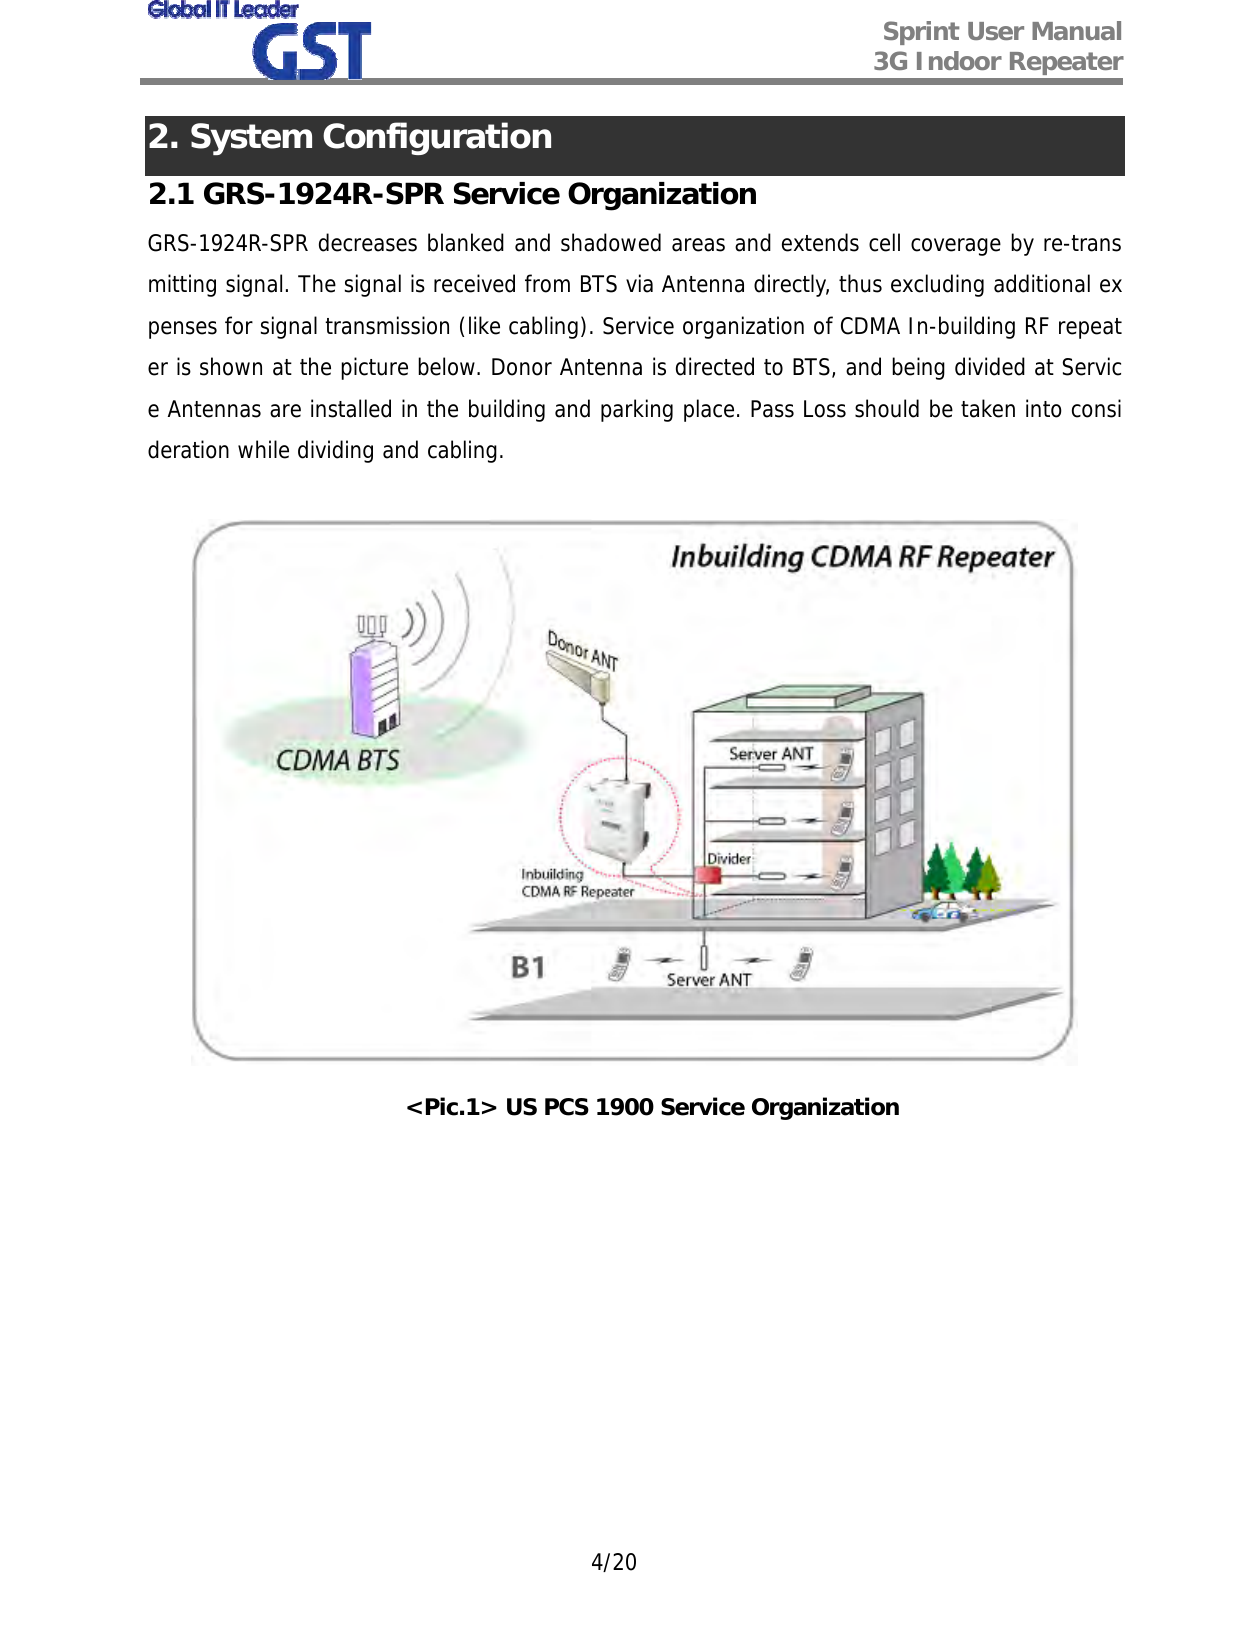  Sprint User Manual 3G Indoor Repeater   4/20 2. System Configuration 2.1 GRS-1924R-SPR Service Organization GRS-1924R-SPR decreases blanked and shadowed areas and extends cell coverage by re-transmitting signal. The signal is received from BTS via Antenna directly, thus excluding additional expenses for signal transmission (like cabling). Service organization of CDMA In-building RF repeater is shown at the picture below. Donor Antenna is directed to BTS, and being divided at Service Antennas are installed in the building and parking place. Pass Loss should be taken into consideration while dividing and cabling.   &lt;Pic.1&gt; US PCS 1900 Service Organization         